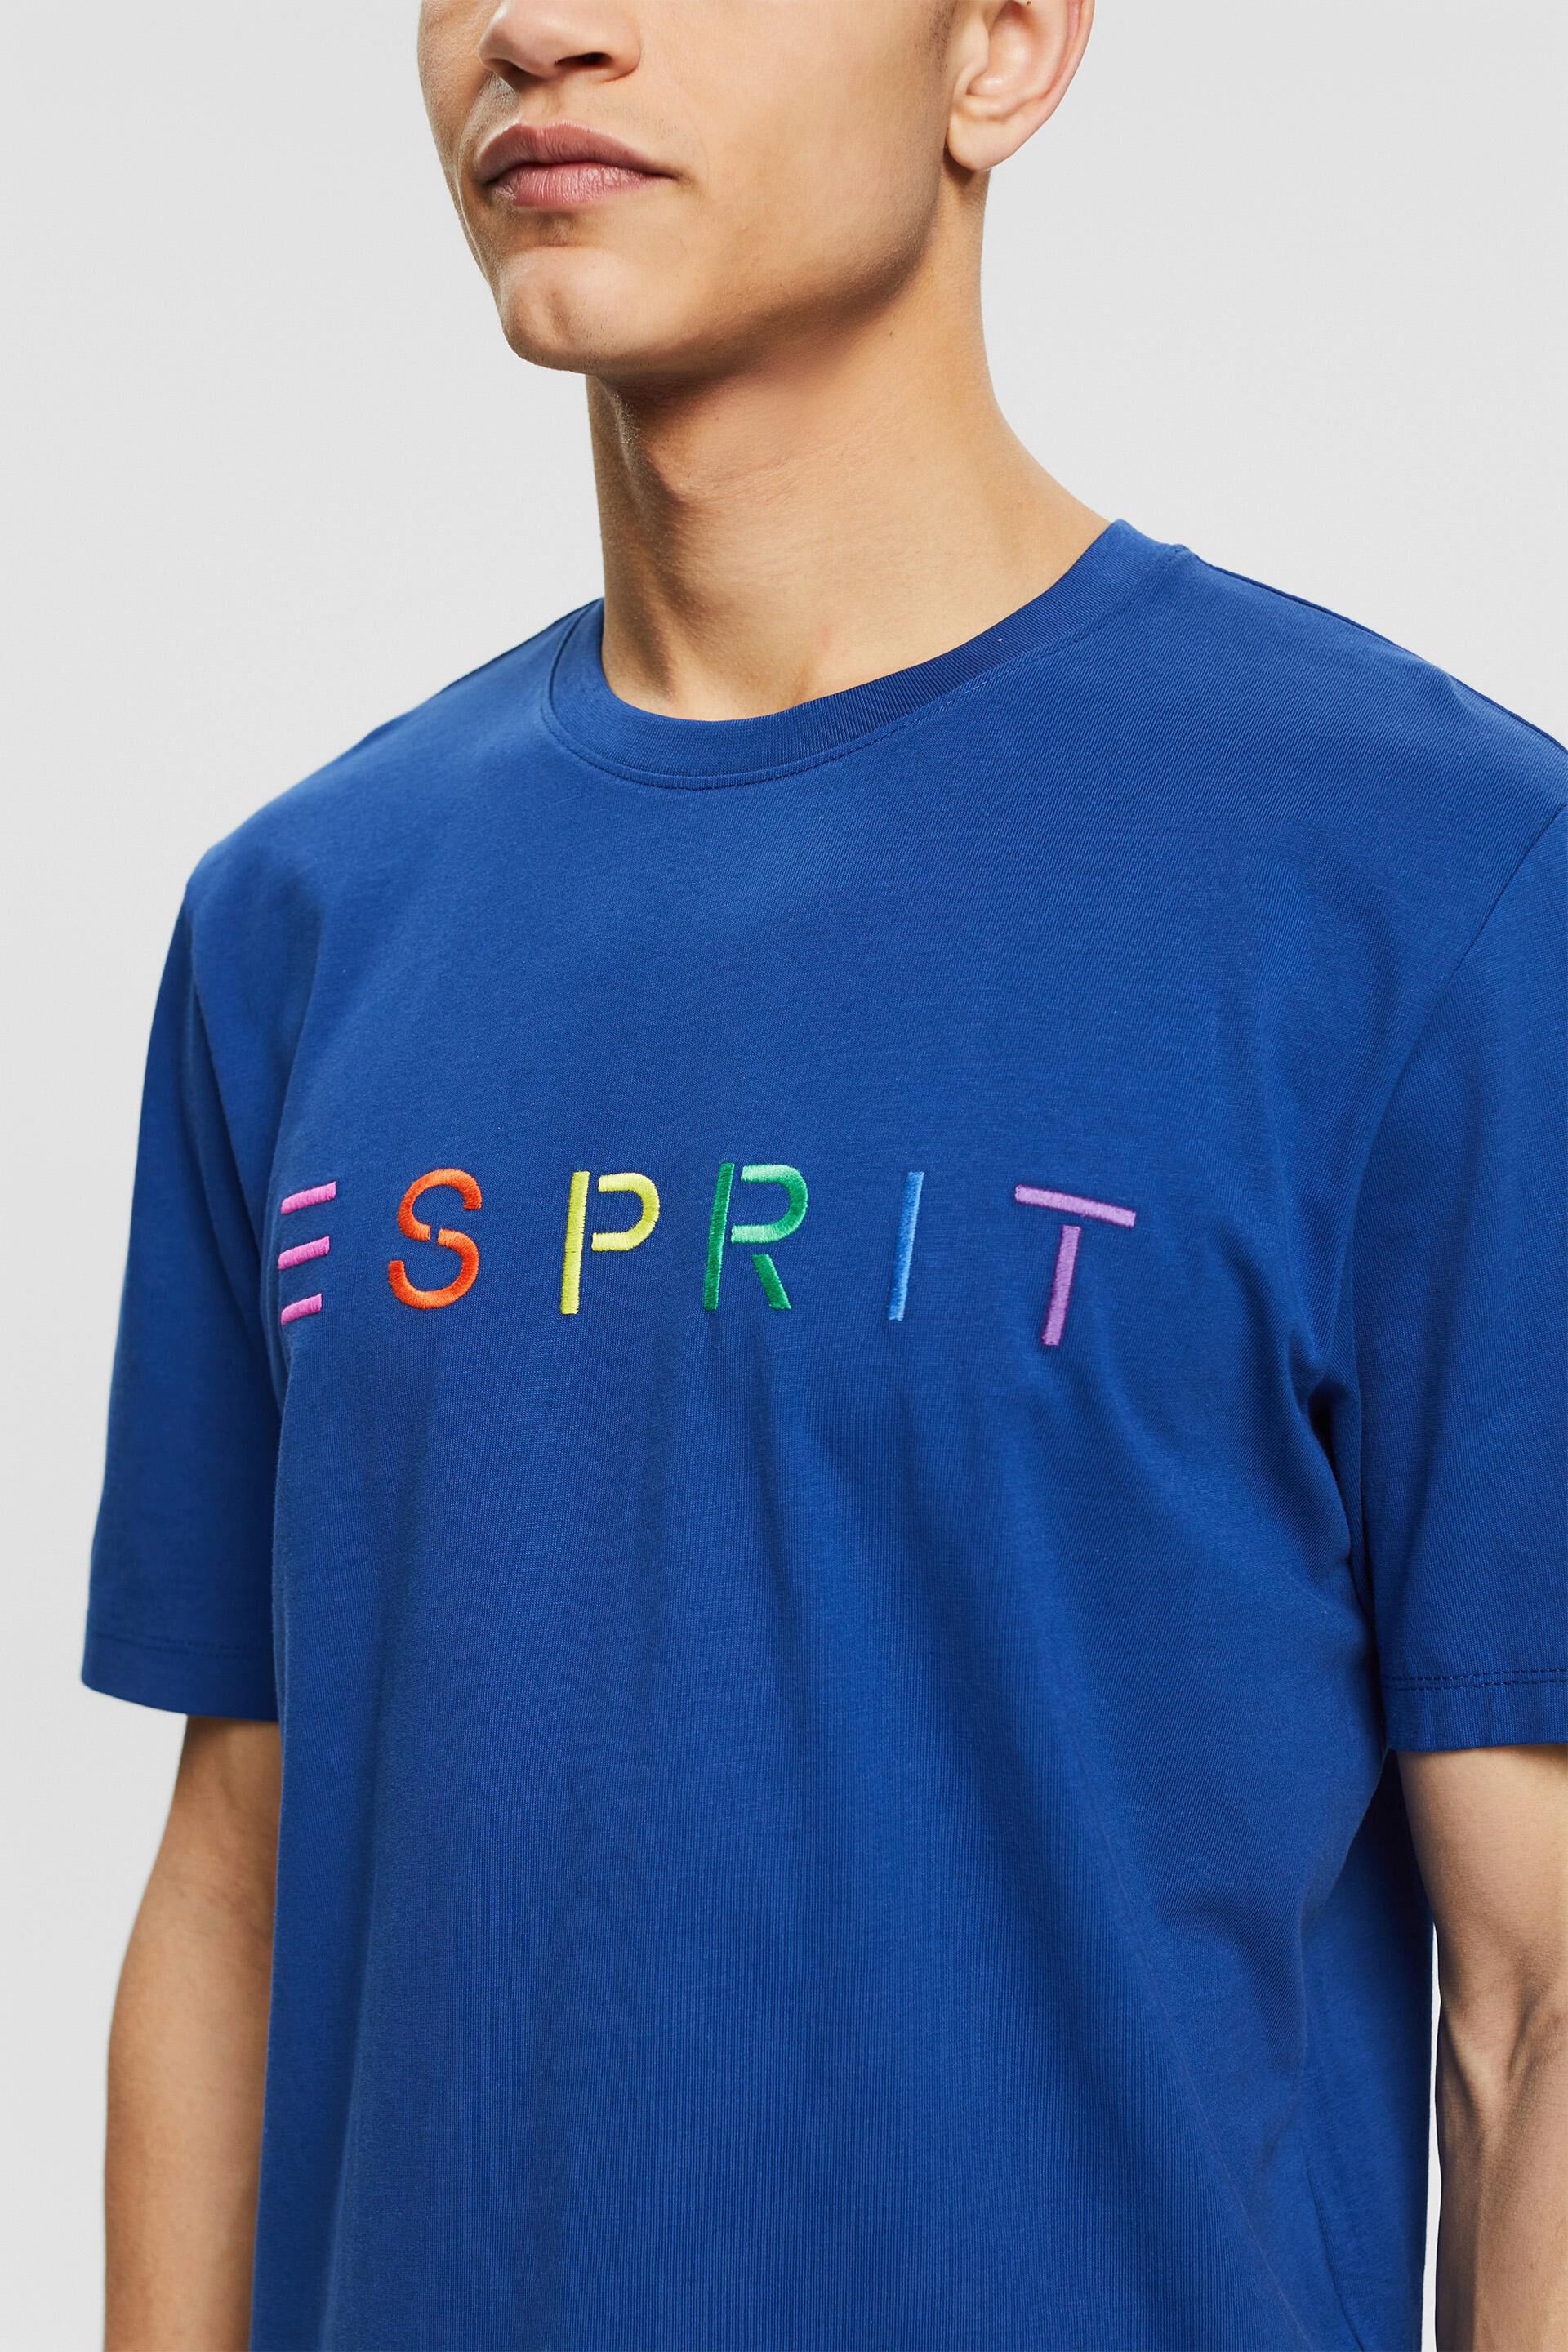 Esprit embroidered t-shirt logo Jersey with